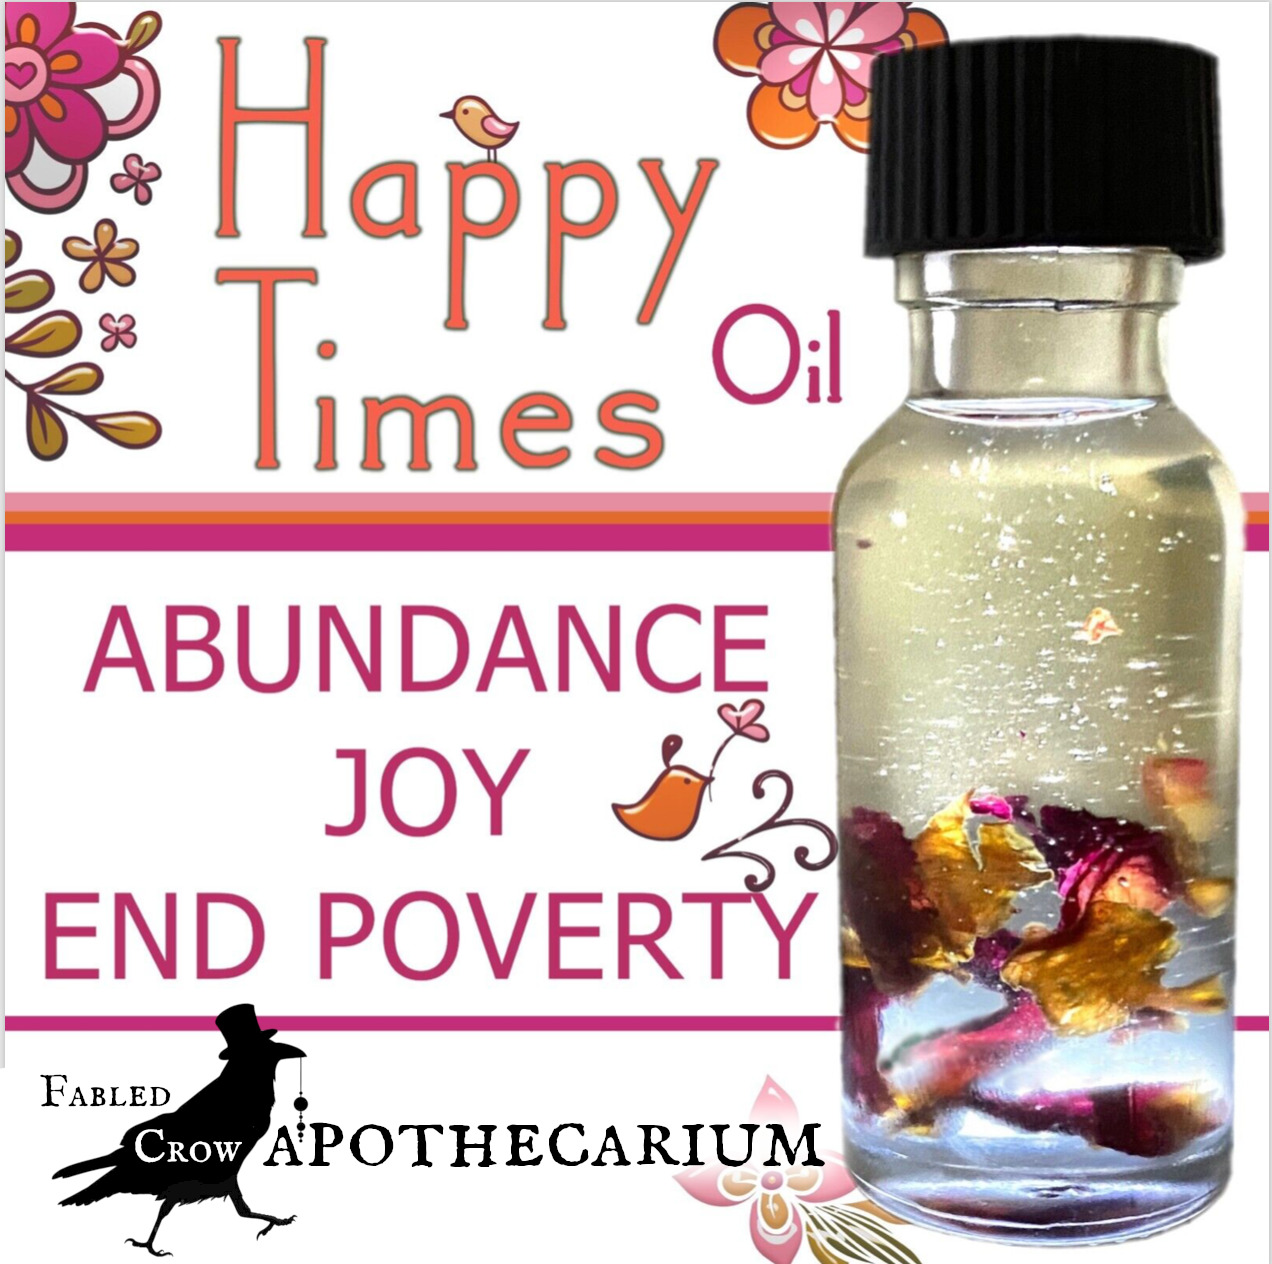 HAPPY TIMES Oil Abundance Happiness Joy Positivity Reverse Poverty FABLED CROW